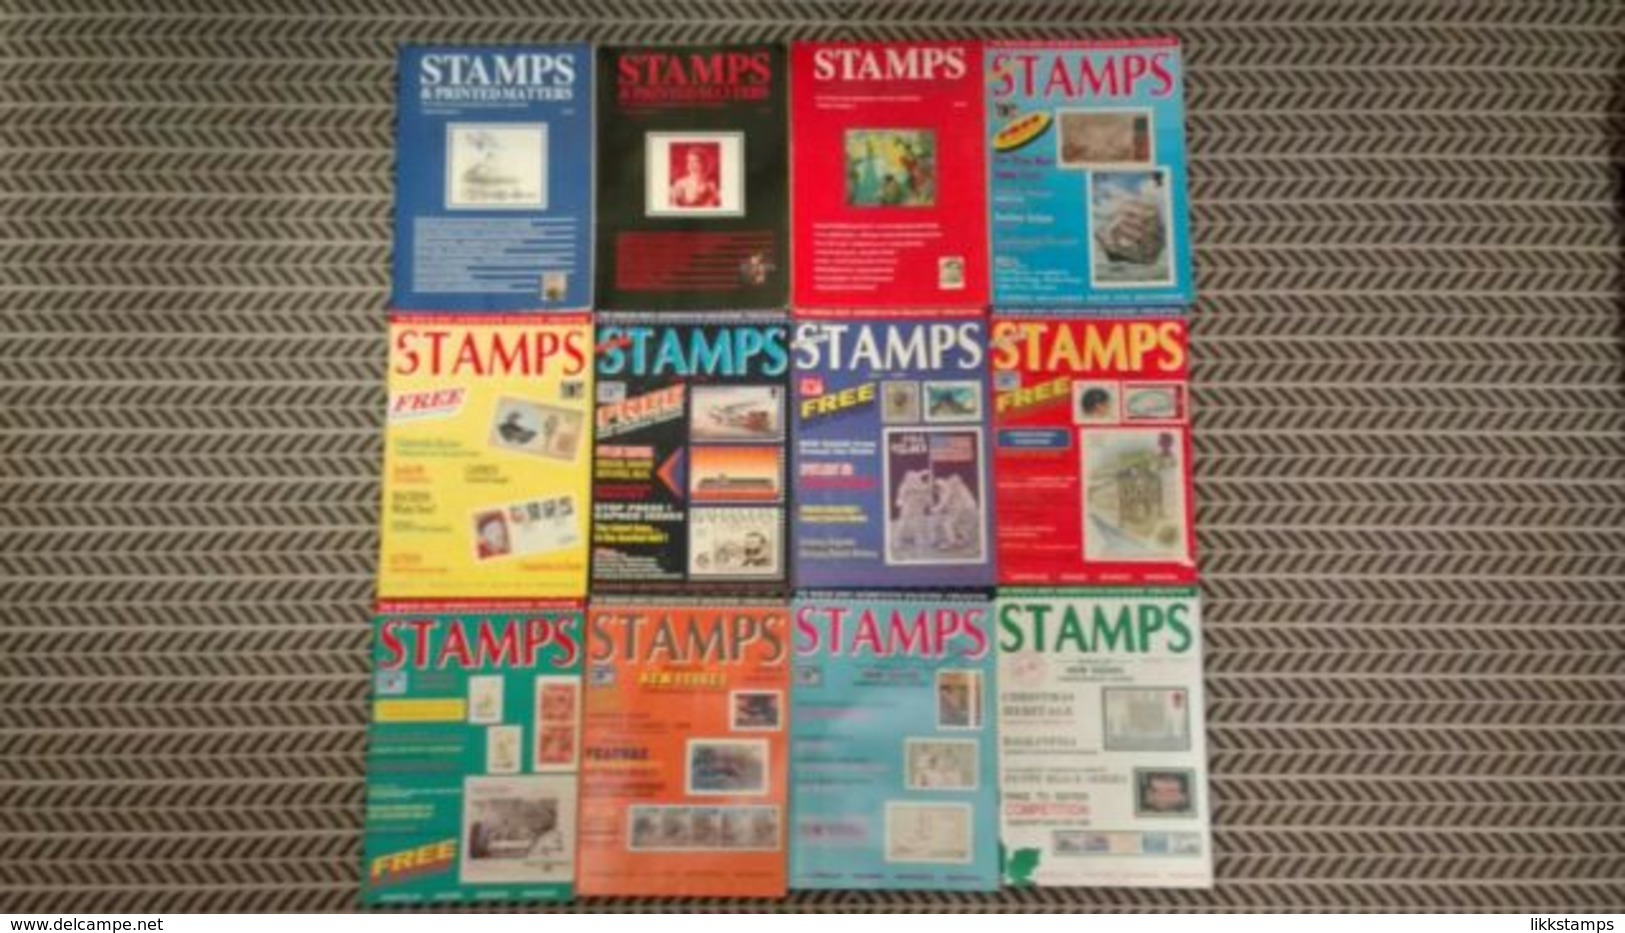 STAMPS AND PRINTED MATTER/STAMPS MAGAZINES JANUARY 1989 TO DECEMBER 1989  VOLUME 9 #L0011 - Englisch (ab 1941)